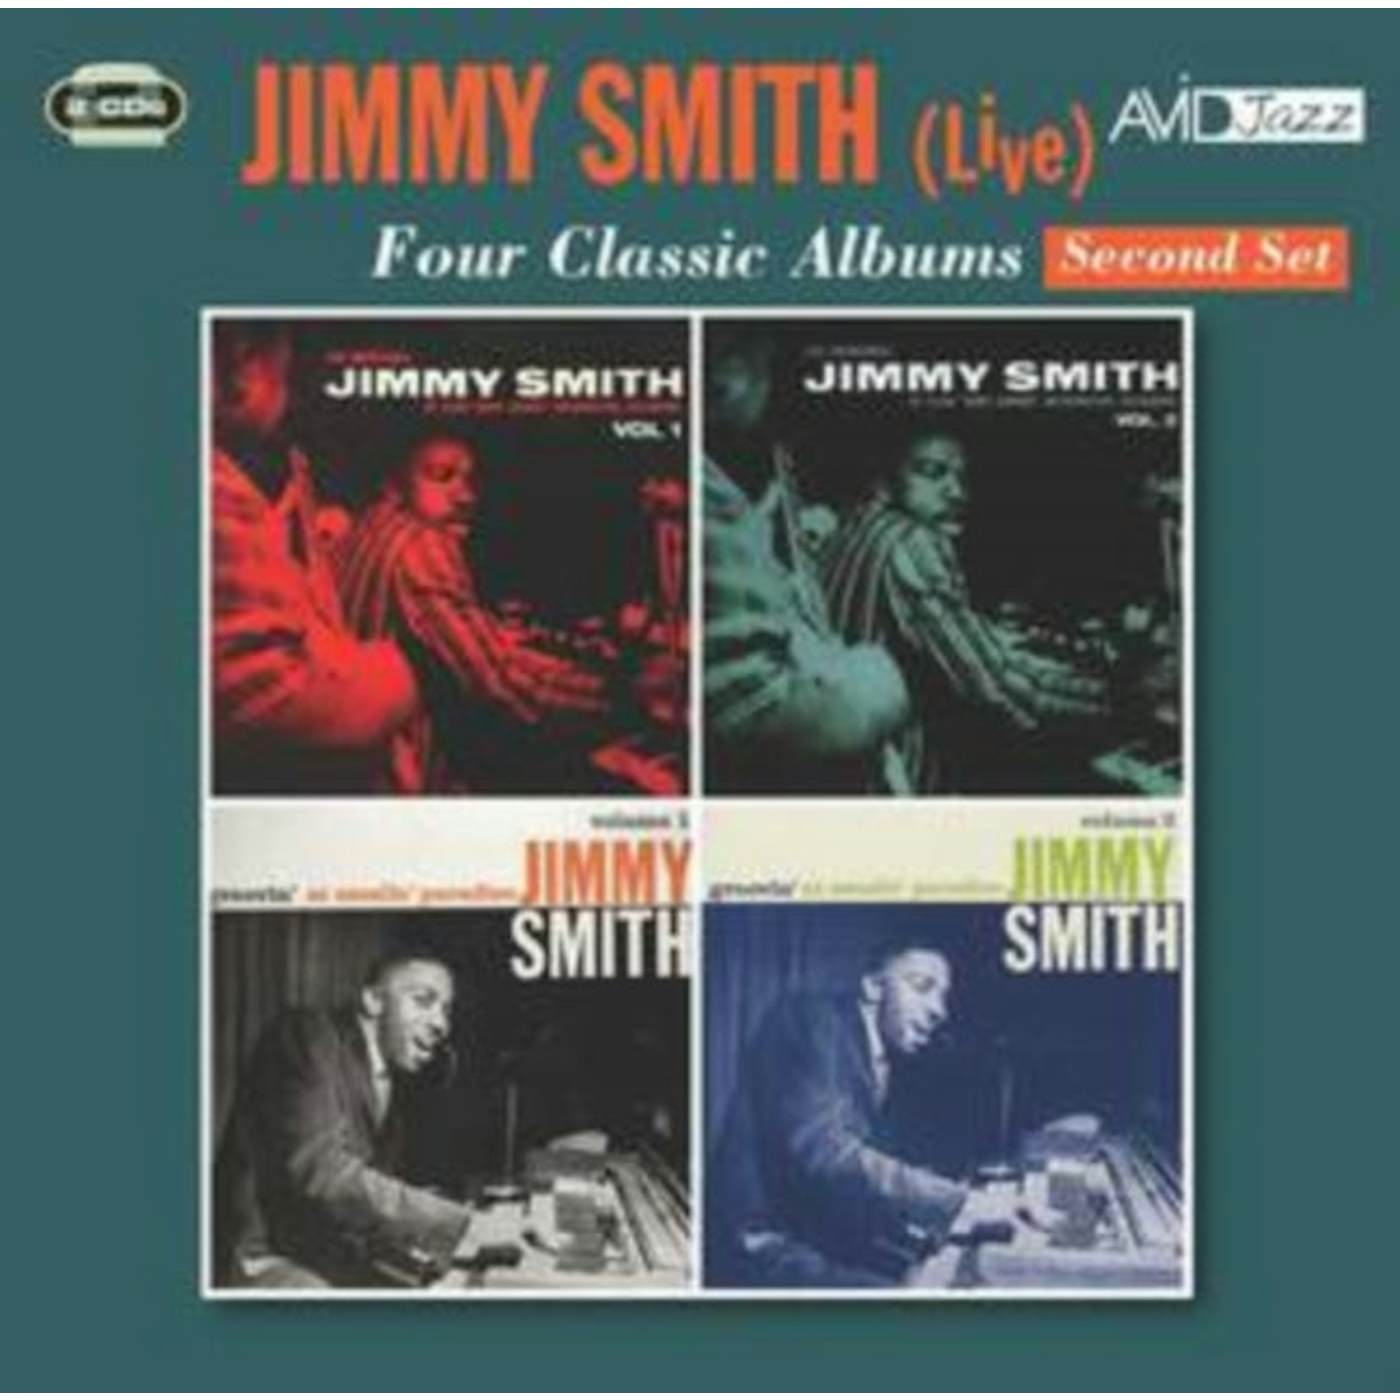 Jimmy Smith CD - Four Classic Albums (Live)